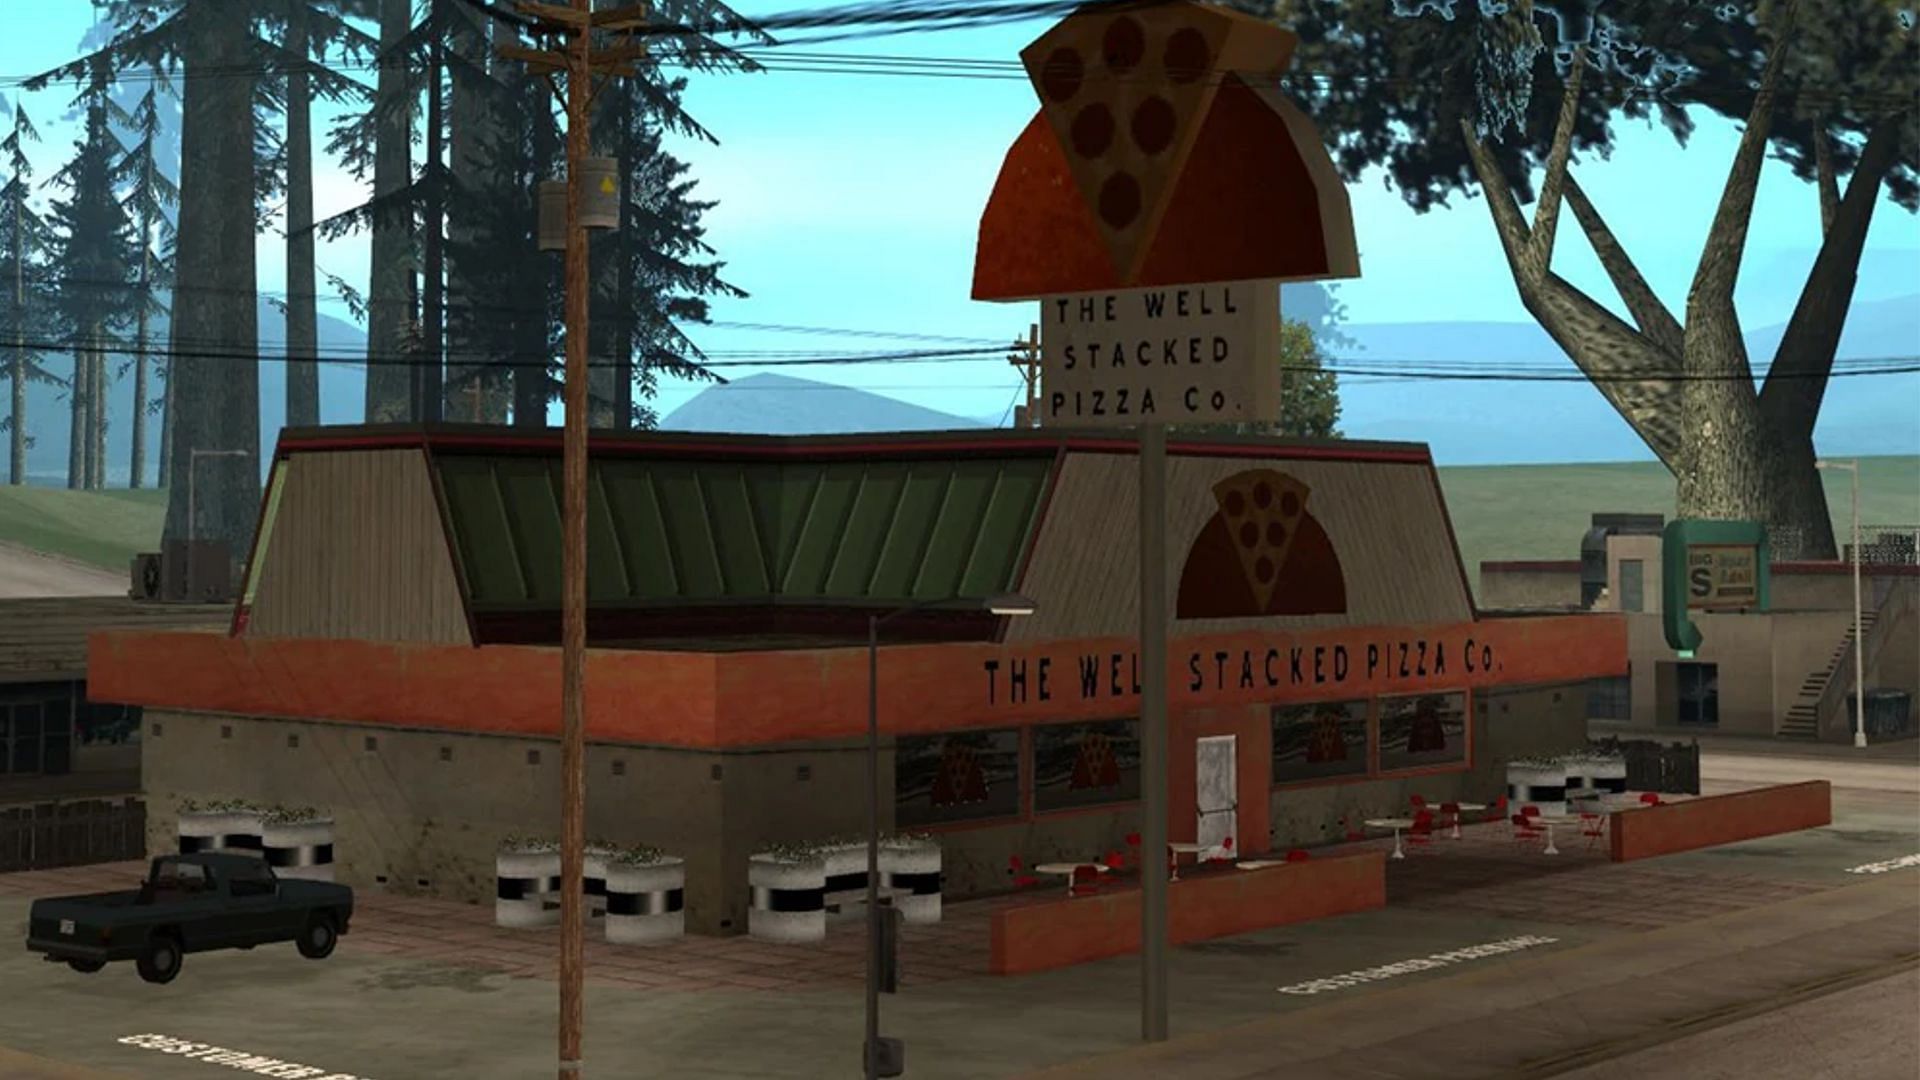 This is what the location looks like in the game (Image via Rockstar Games)